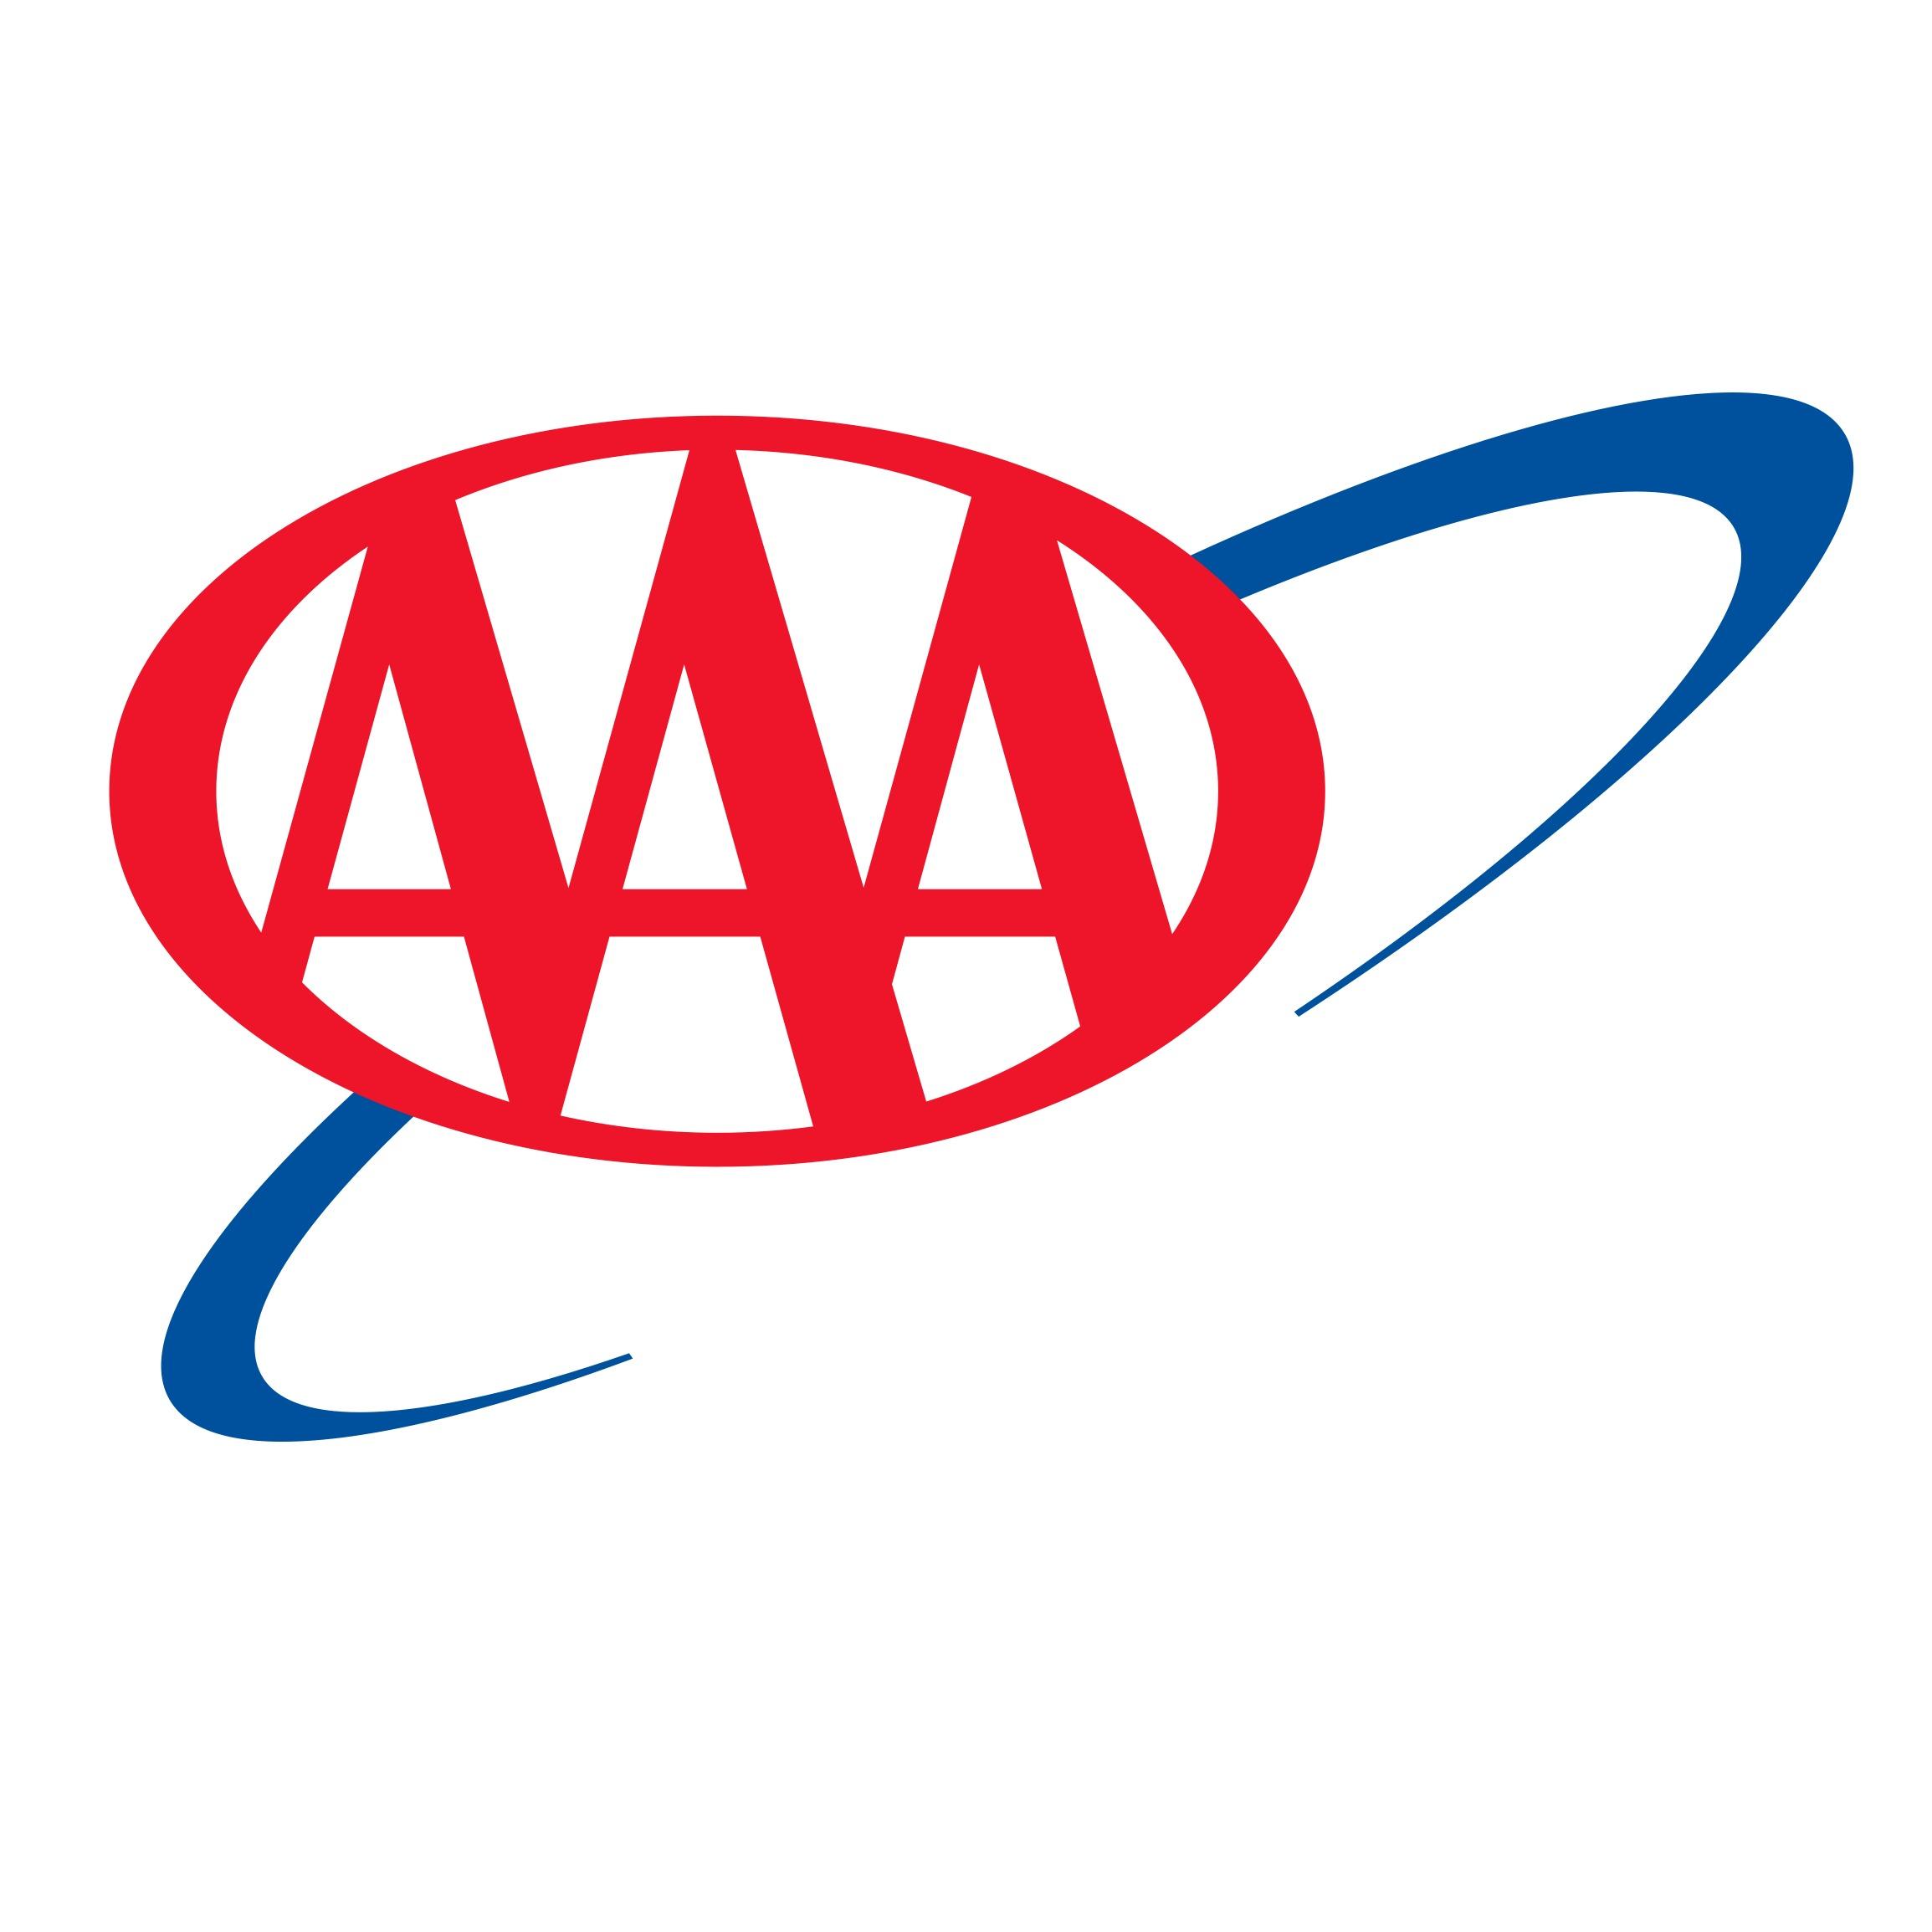 AAA - Amherst - Amherst, NY 14221 - (716)630-3799 | ShowMeLocal.com